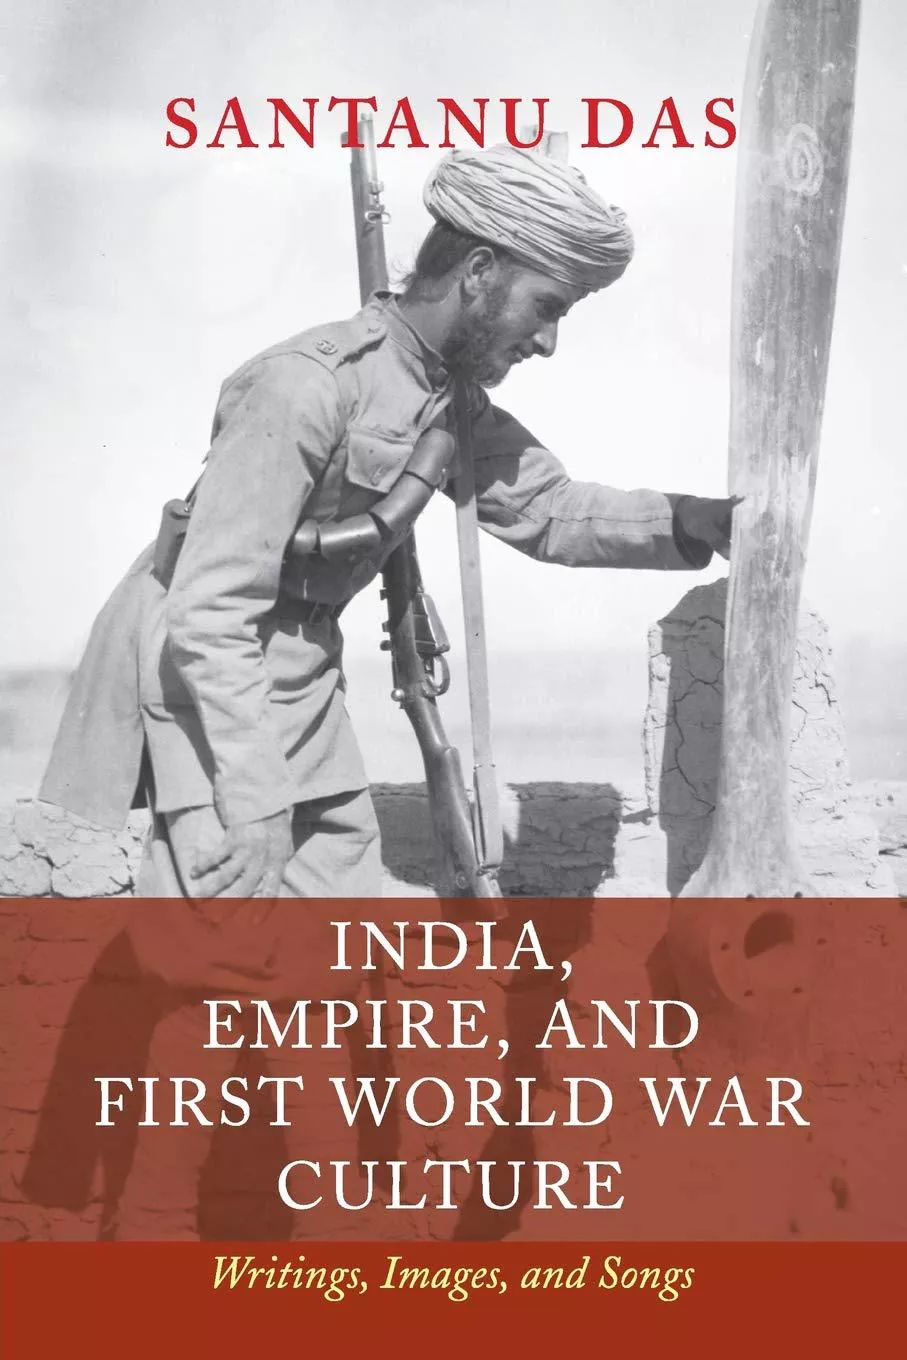 India, empire, and first world war